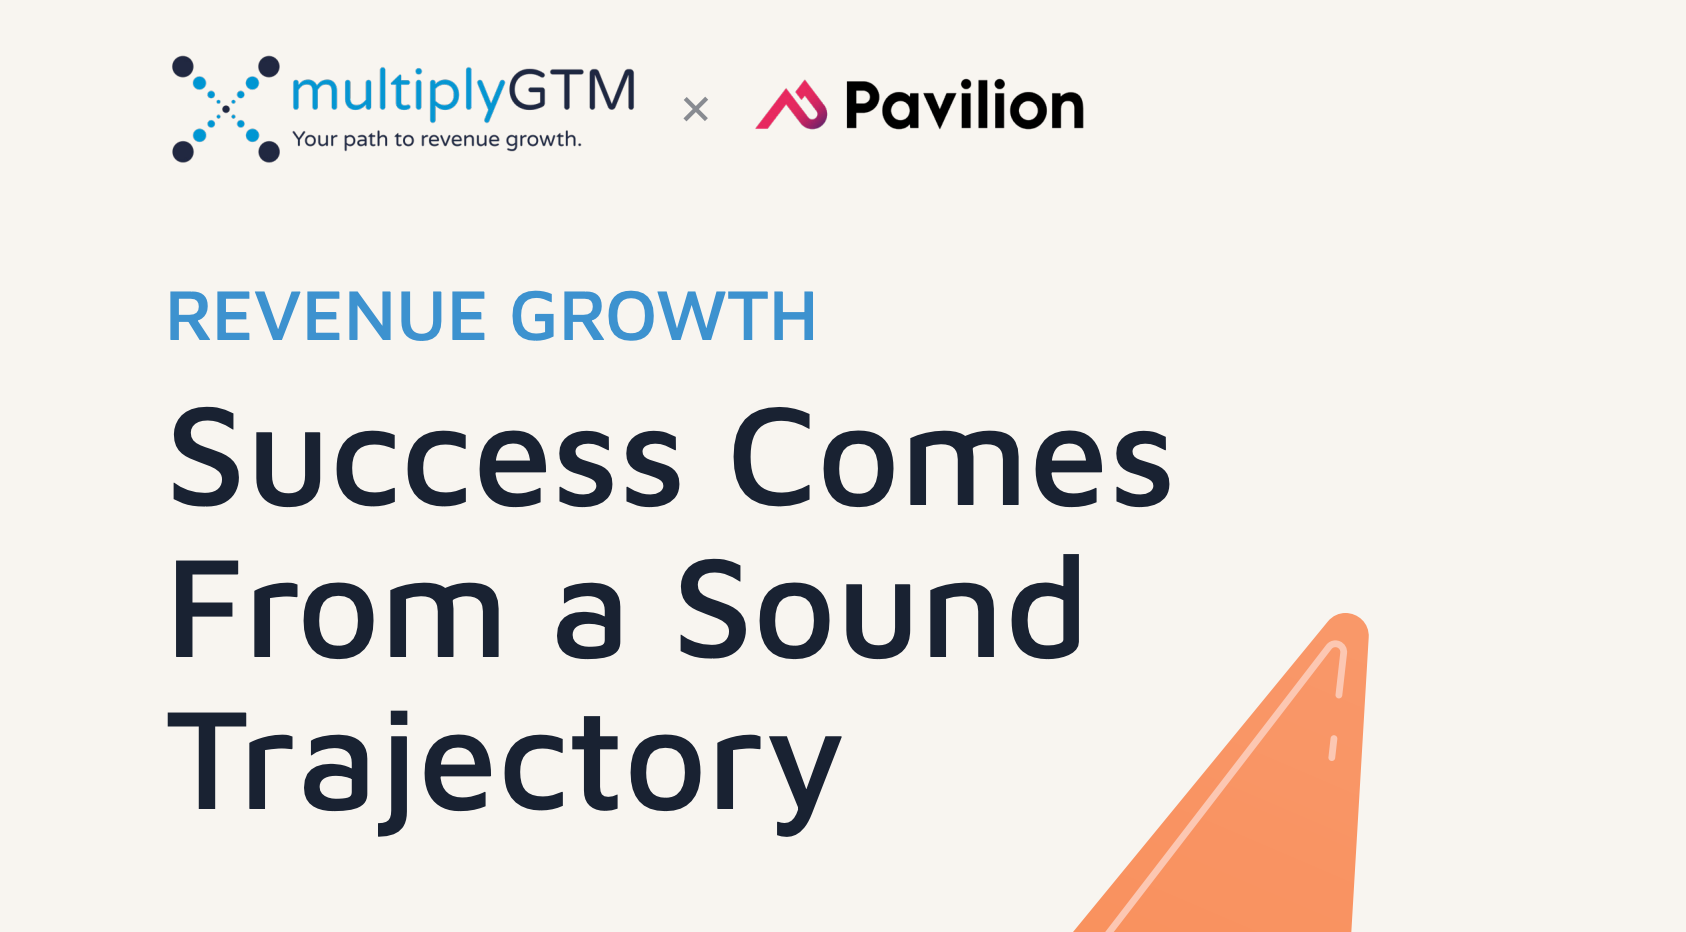 Success Comes From a Sound Trajectory